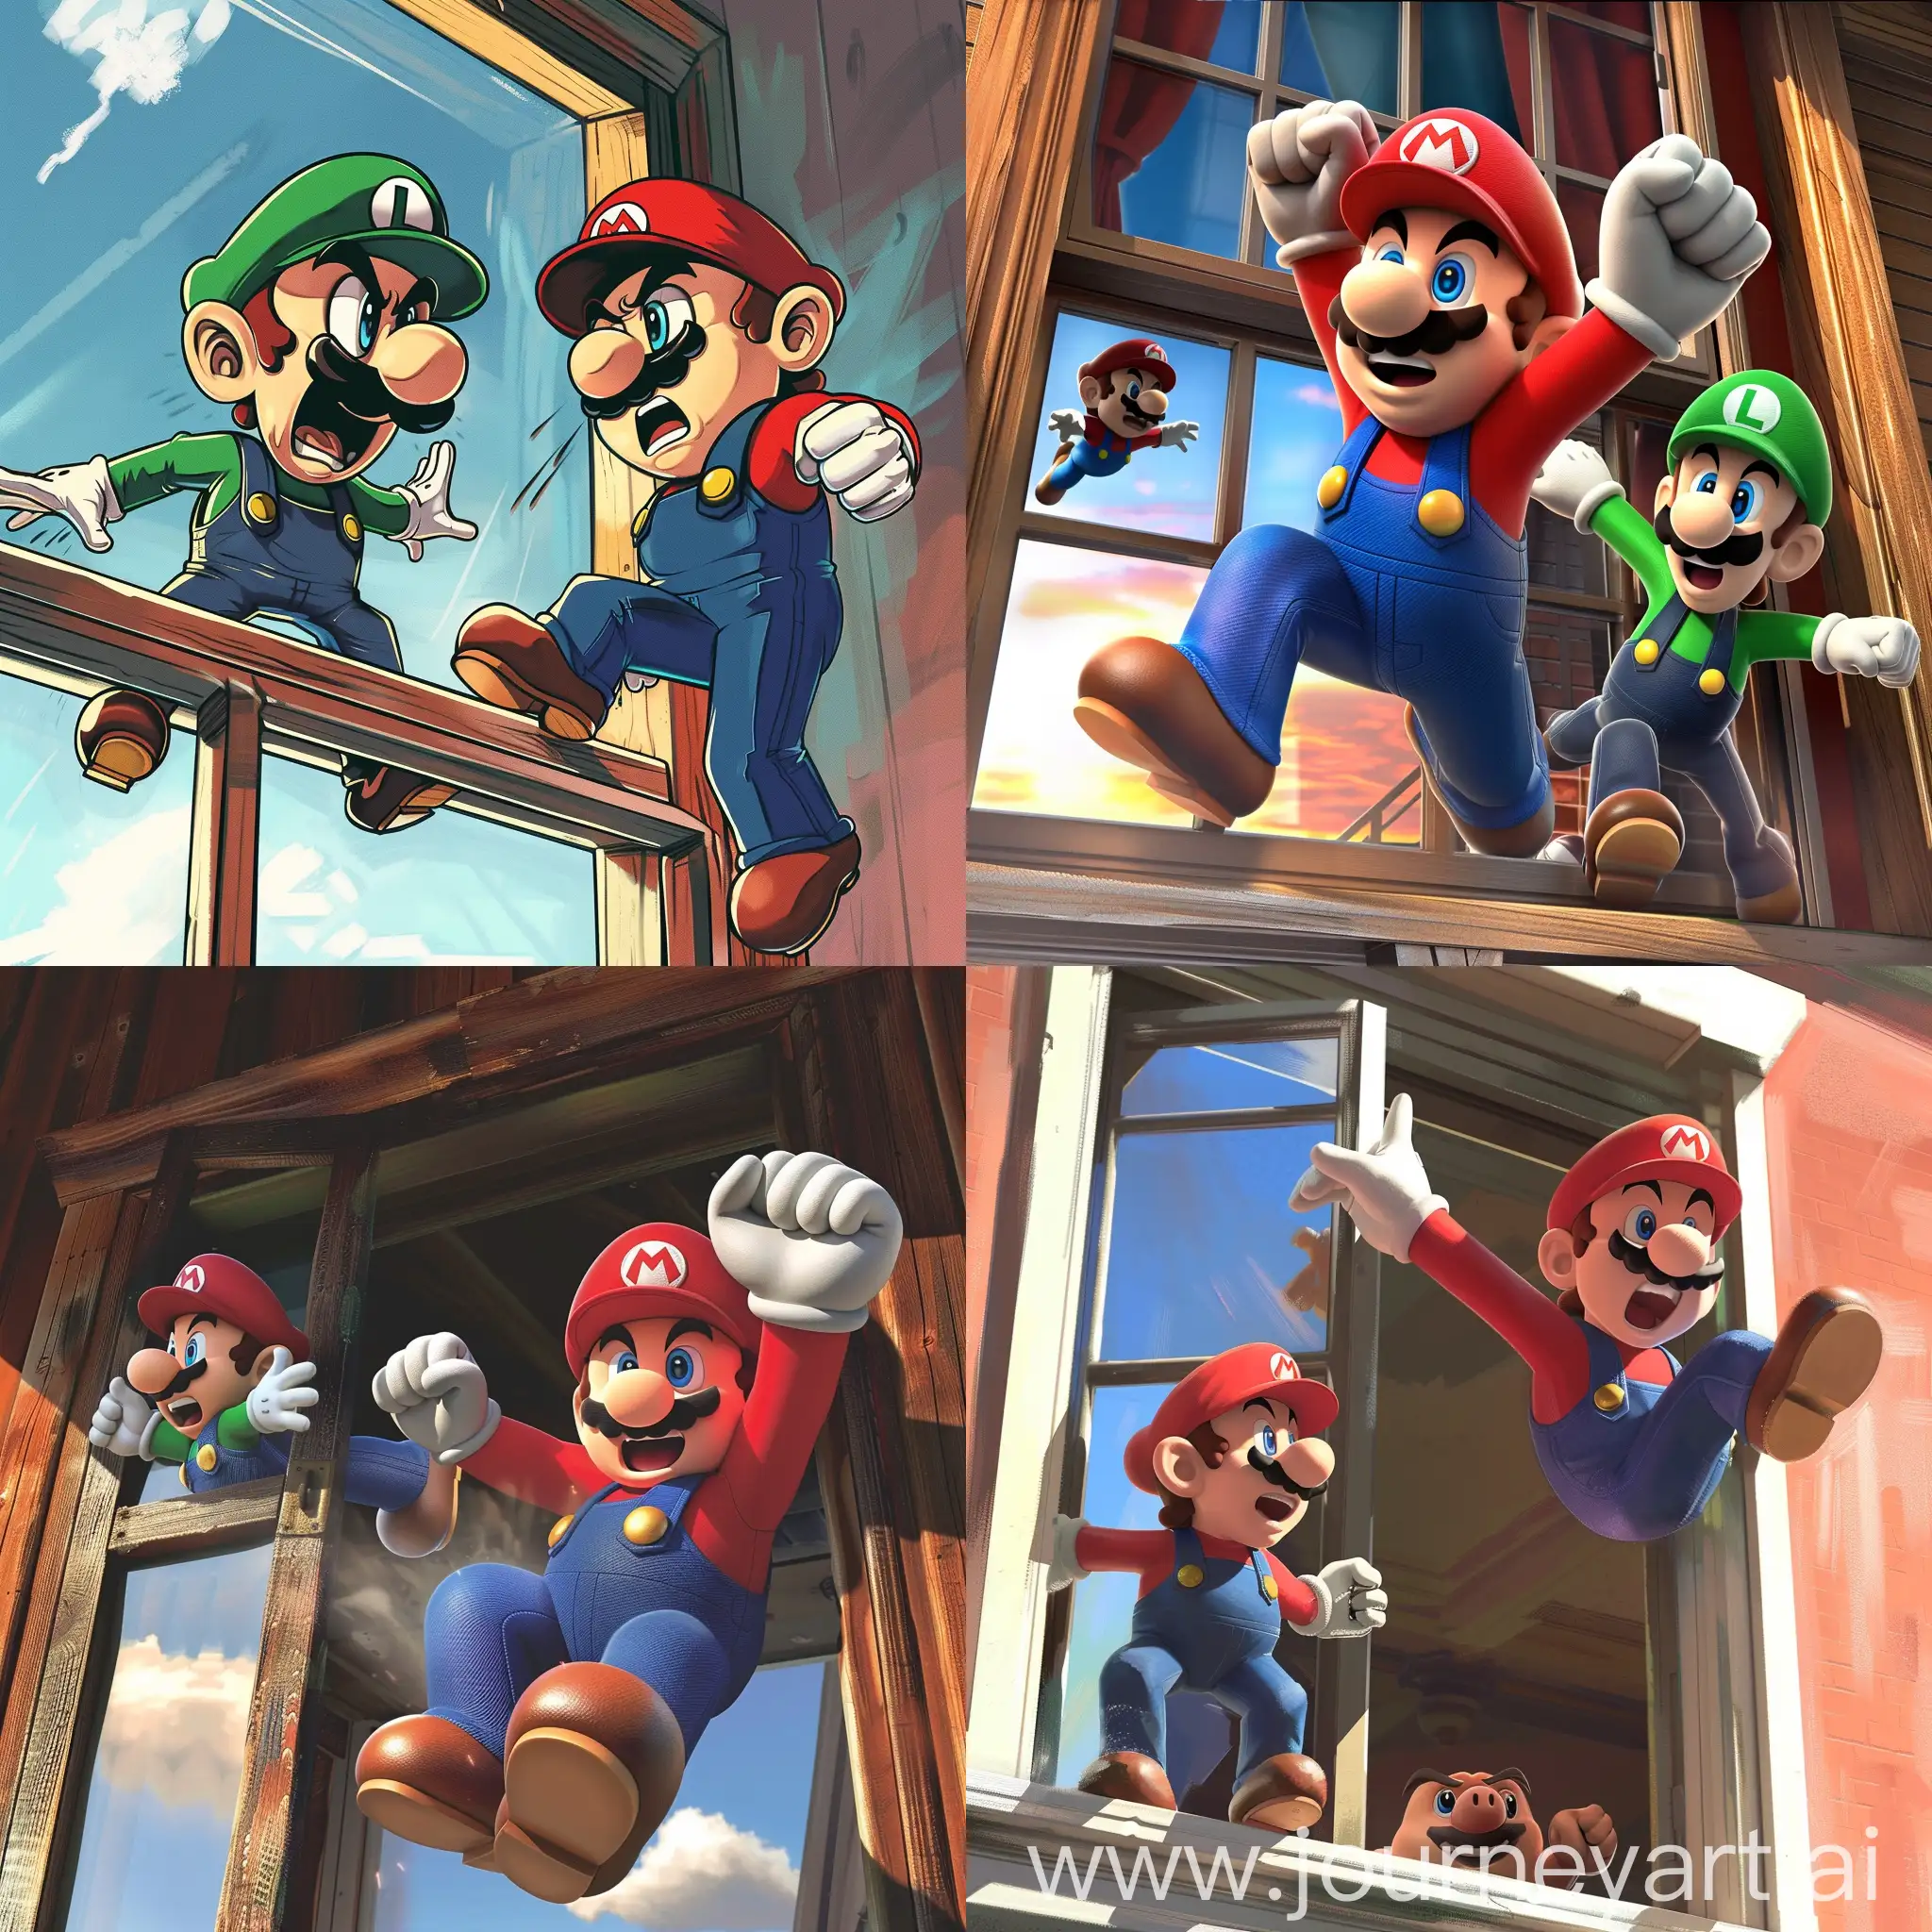 Mario-Throws-Luigi-Out-the-Window-Fraternal-Dispute-in-Pixelated-Action